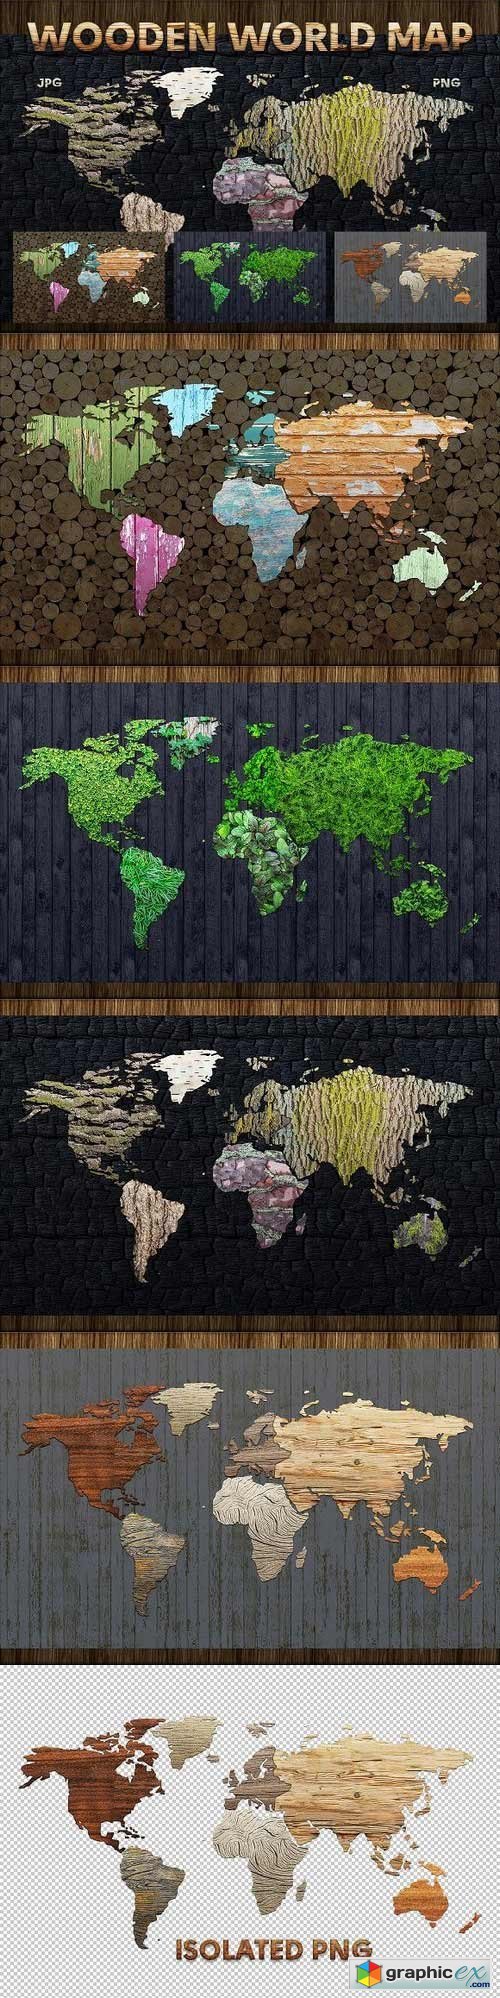 Wooden World Map Extended License